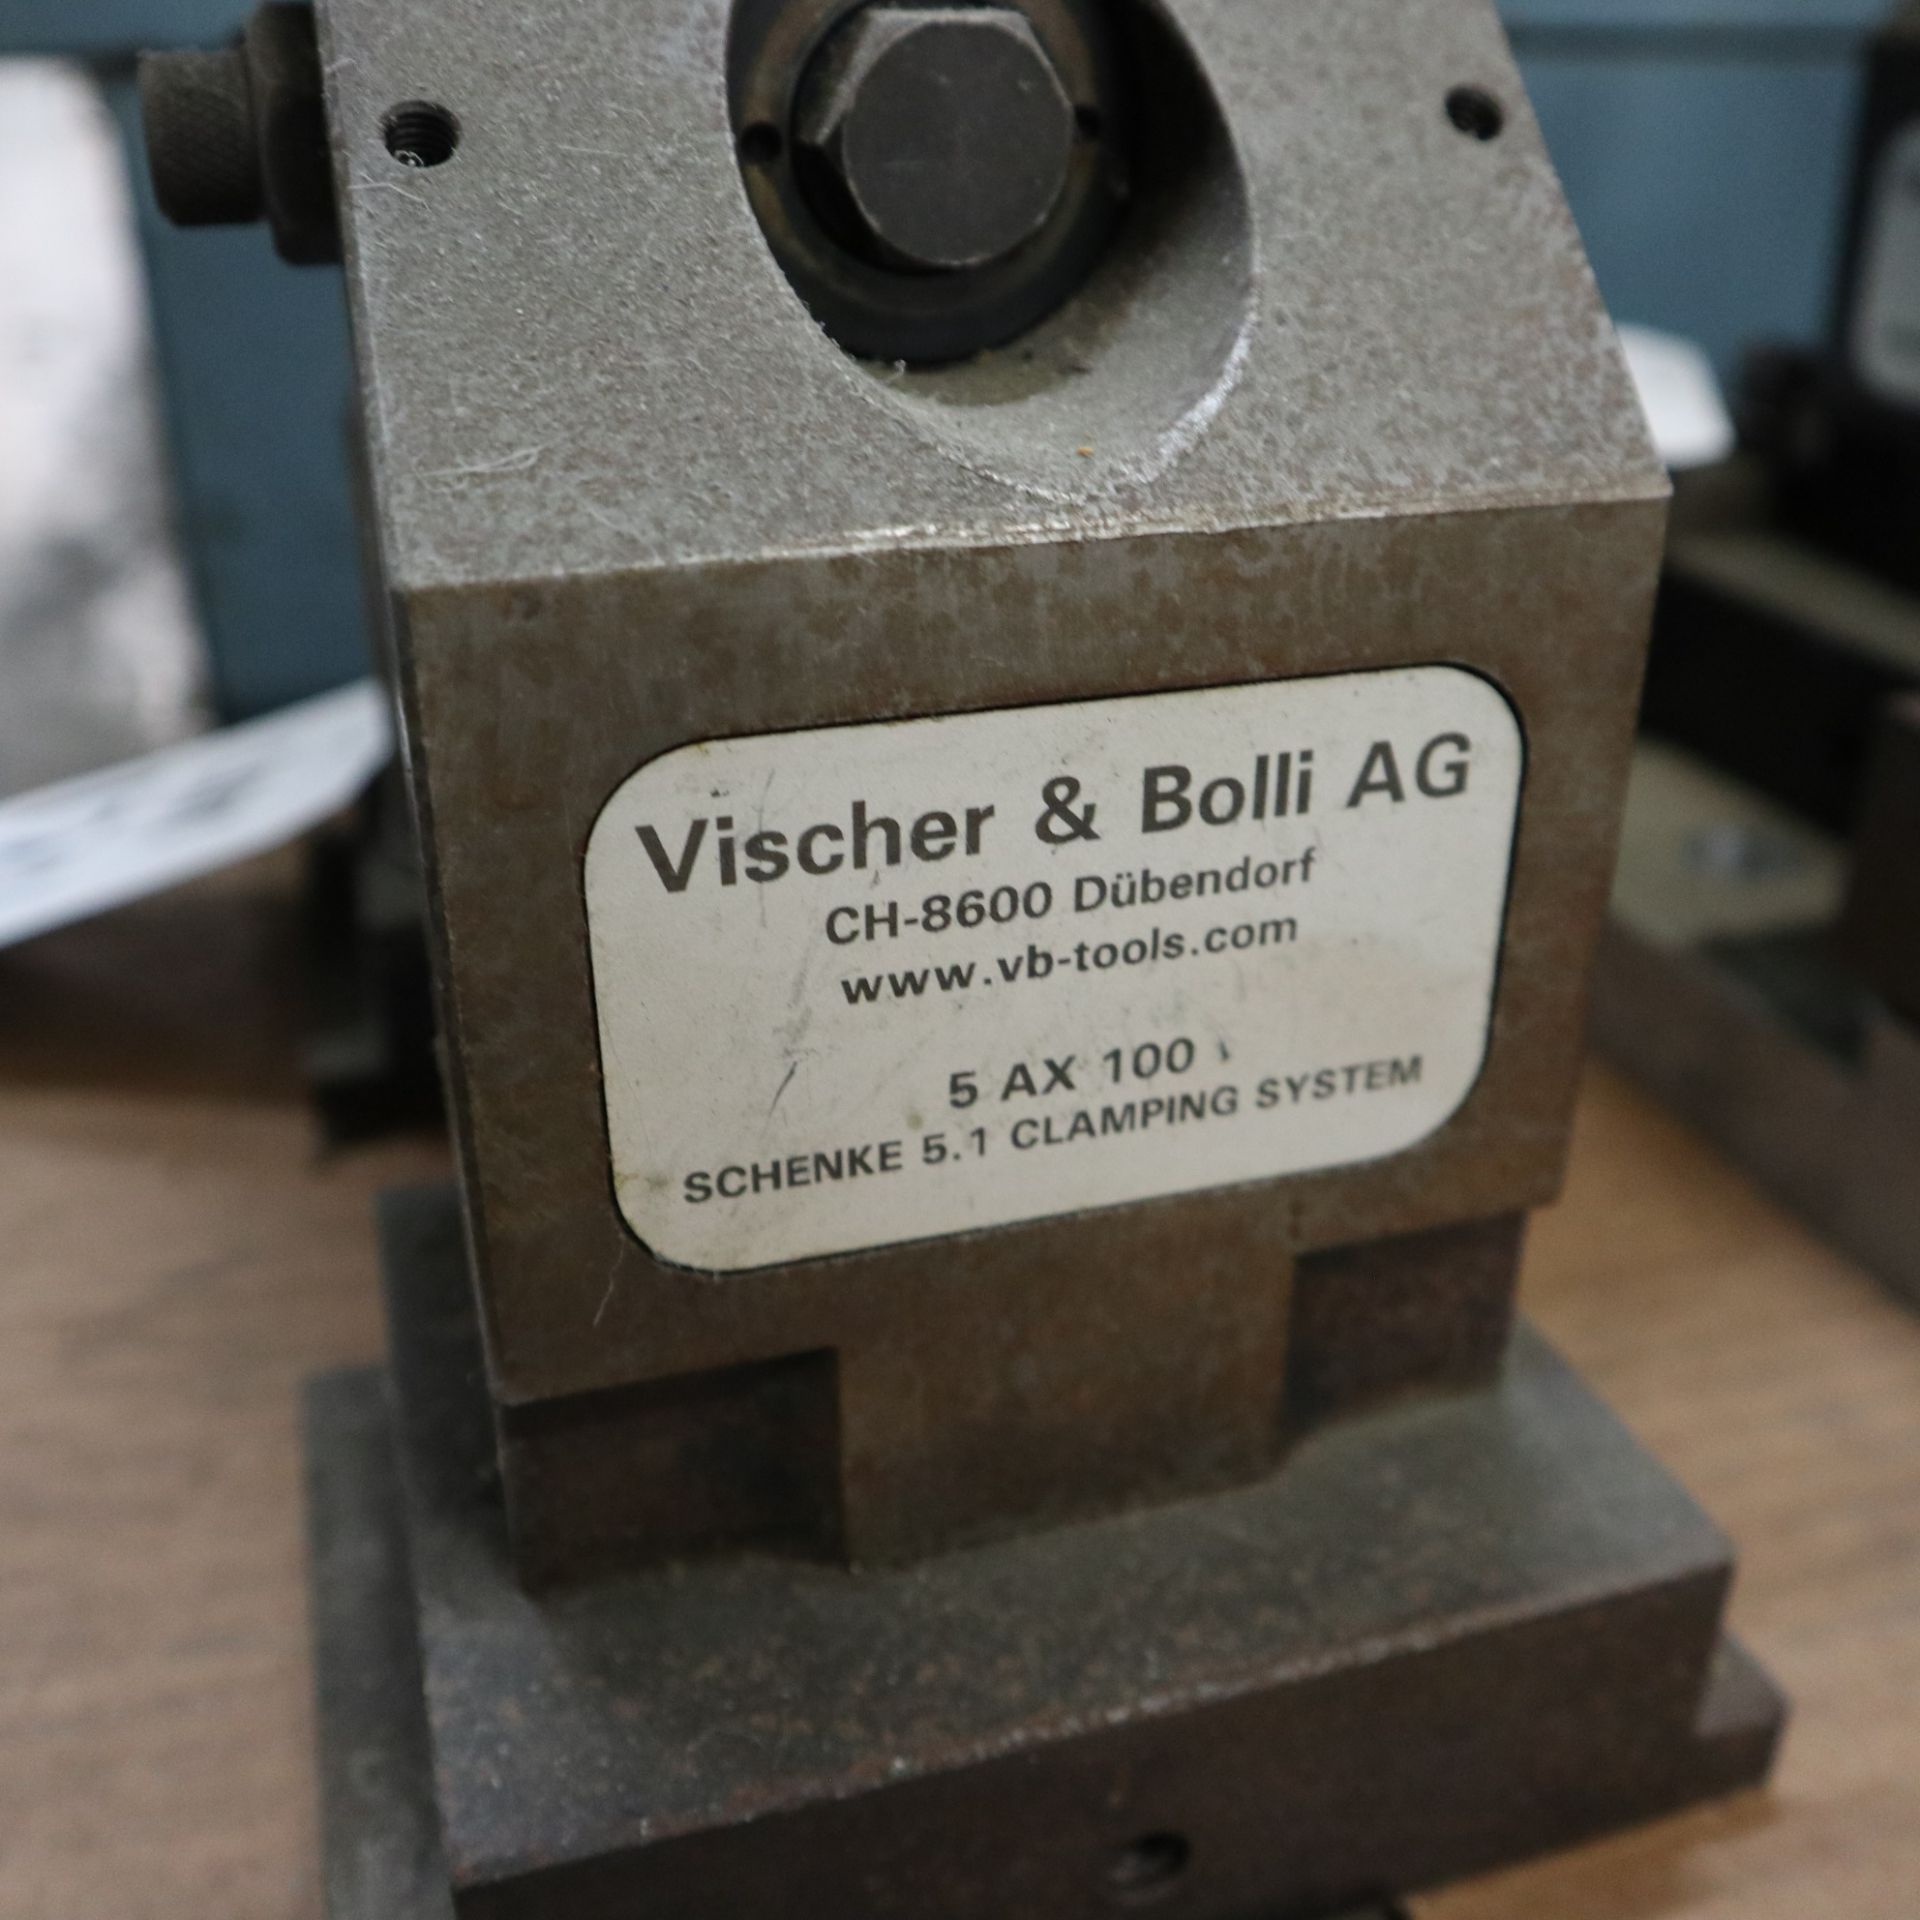 VISCHER & BOLLI AG CH-8600, 5 AX 100 SCHENKE 5.1 CLAMPING SYSTEM - Image 2 of 2